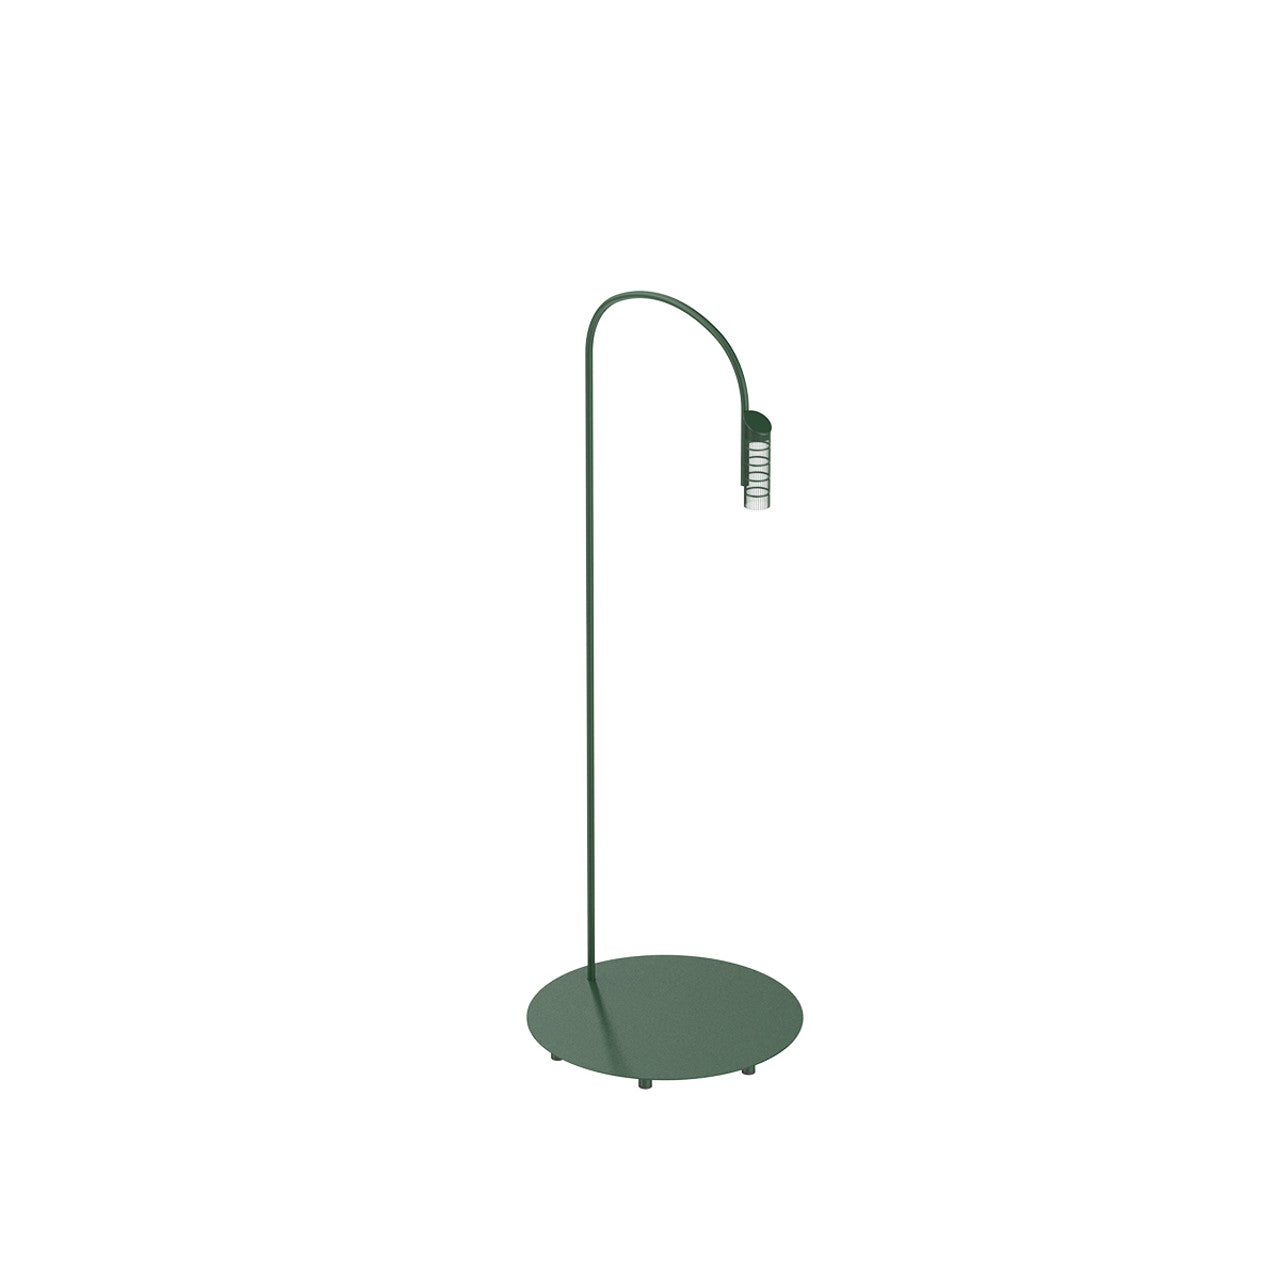 Flos Caule 3000K Model 3 Outdoor Floor Lamp in Forest Green with Nest Shade For Sale